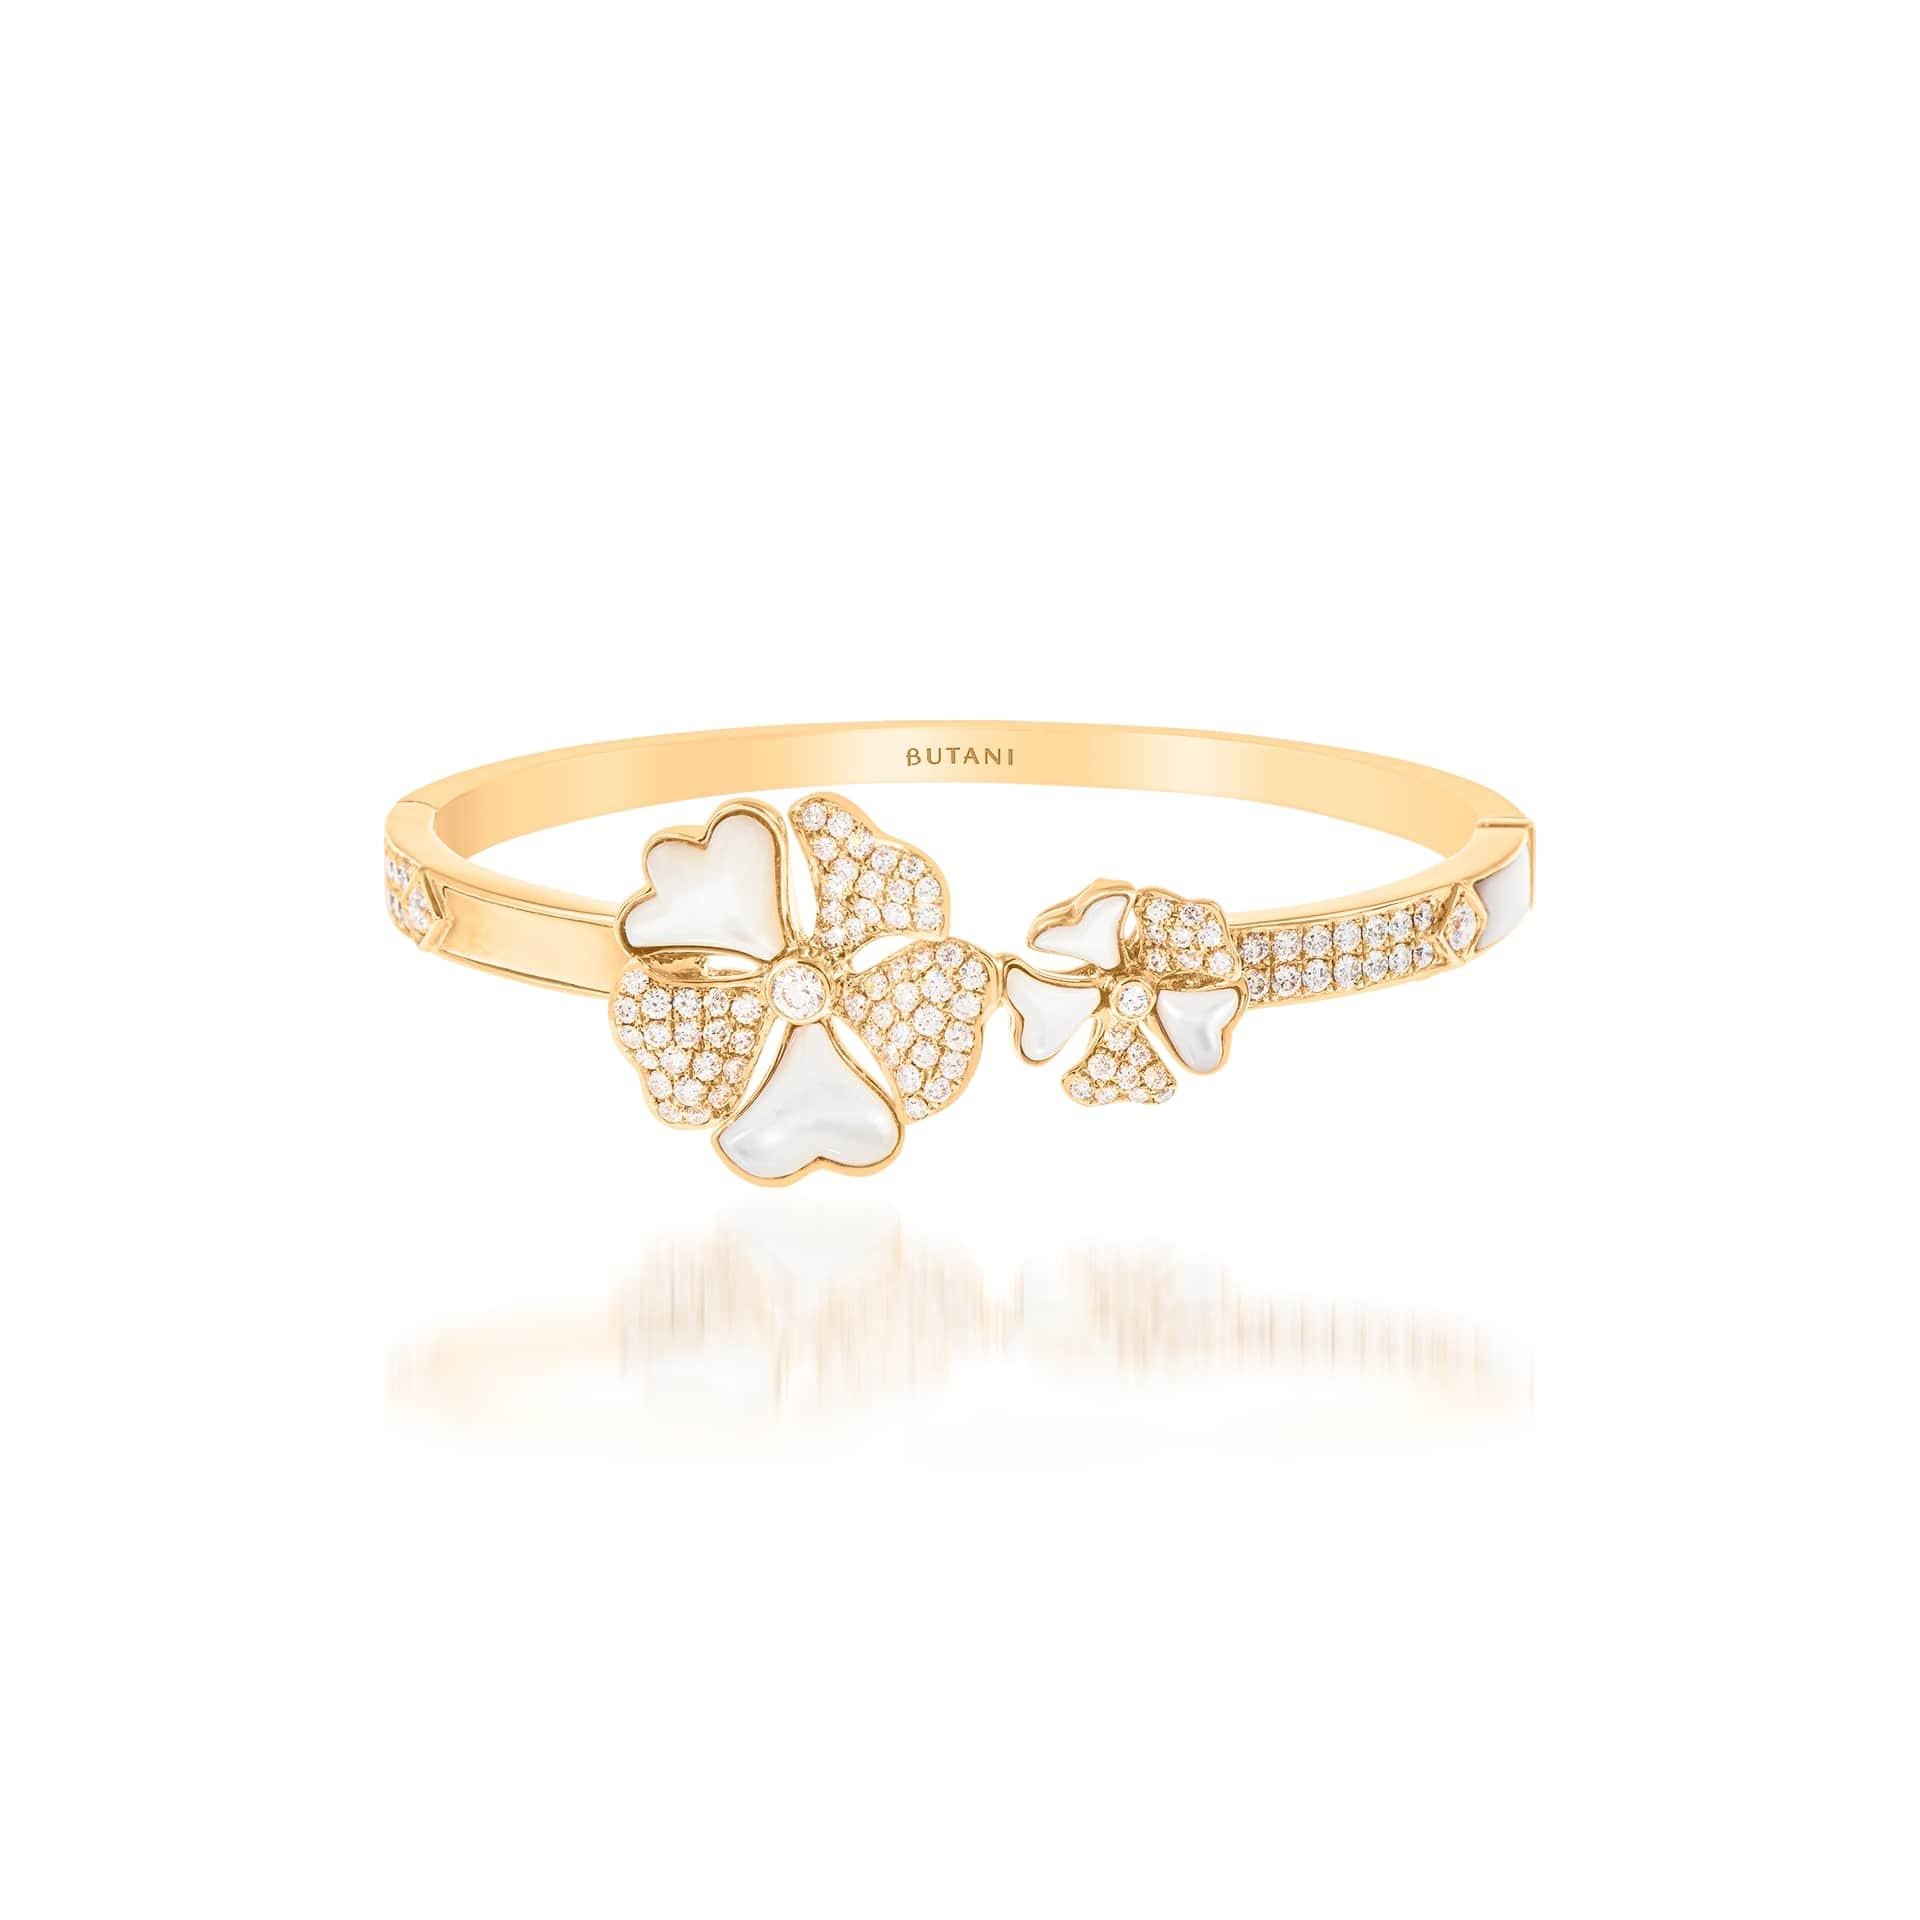 Bloom Diamond and Mother-of-Pearl Duo Flower Bangle in 18K Yellow Gold

Inspired by the exquisite petals of the alpine cinquefoil flower, the Bloom collection combines the richness of diamonds and precious metals with the light versatility of this